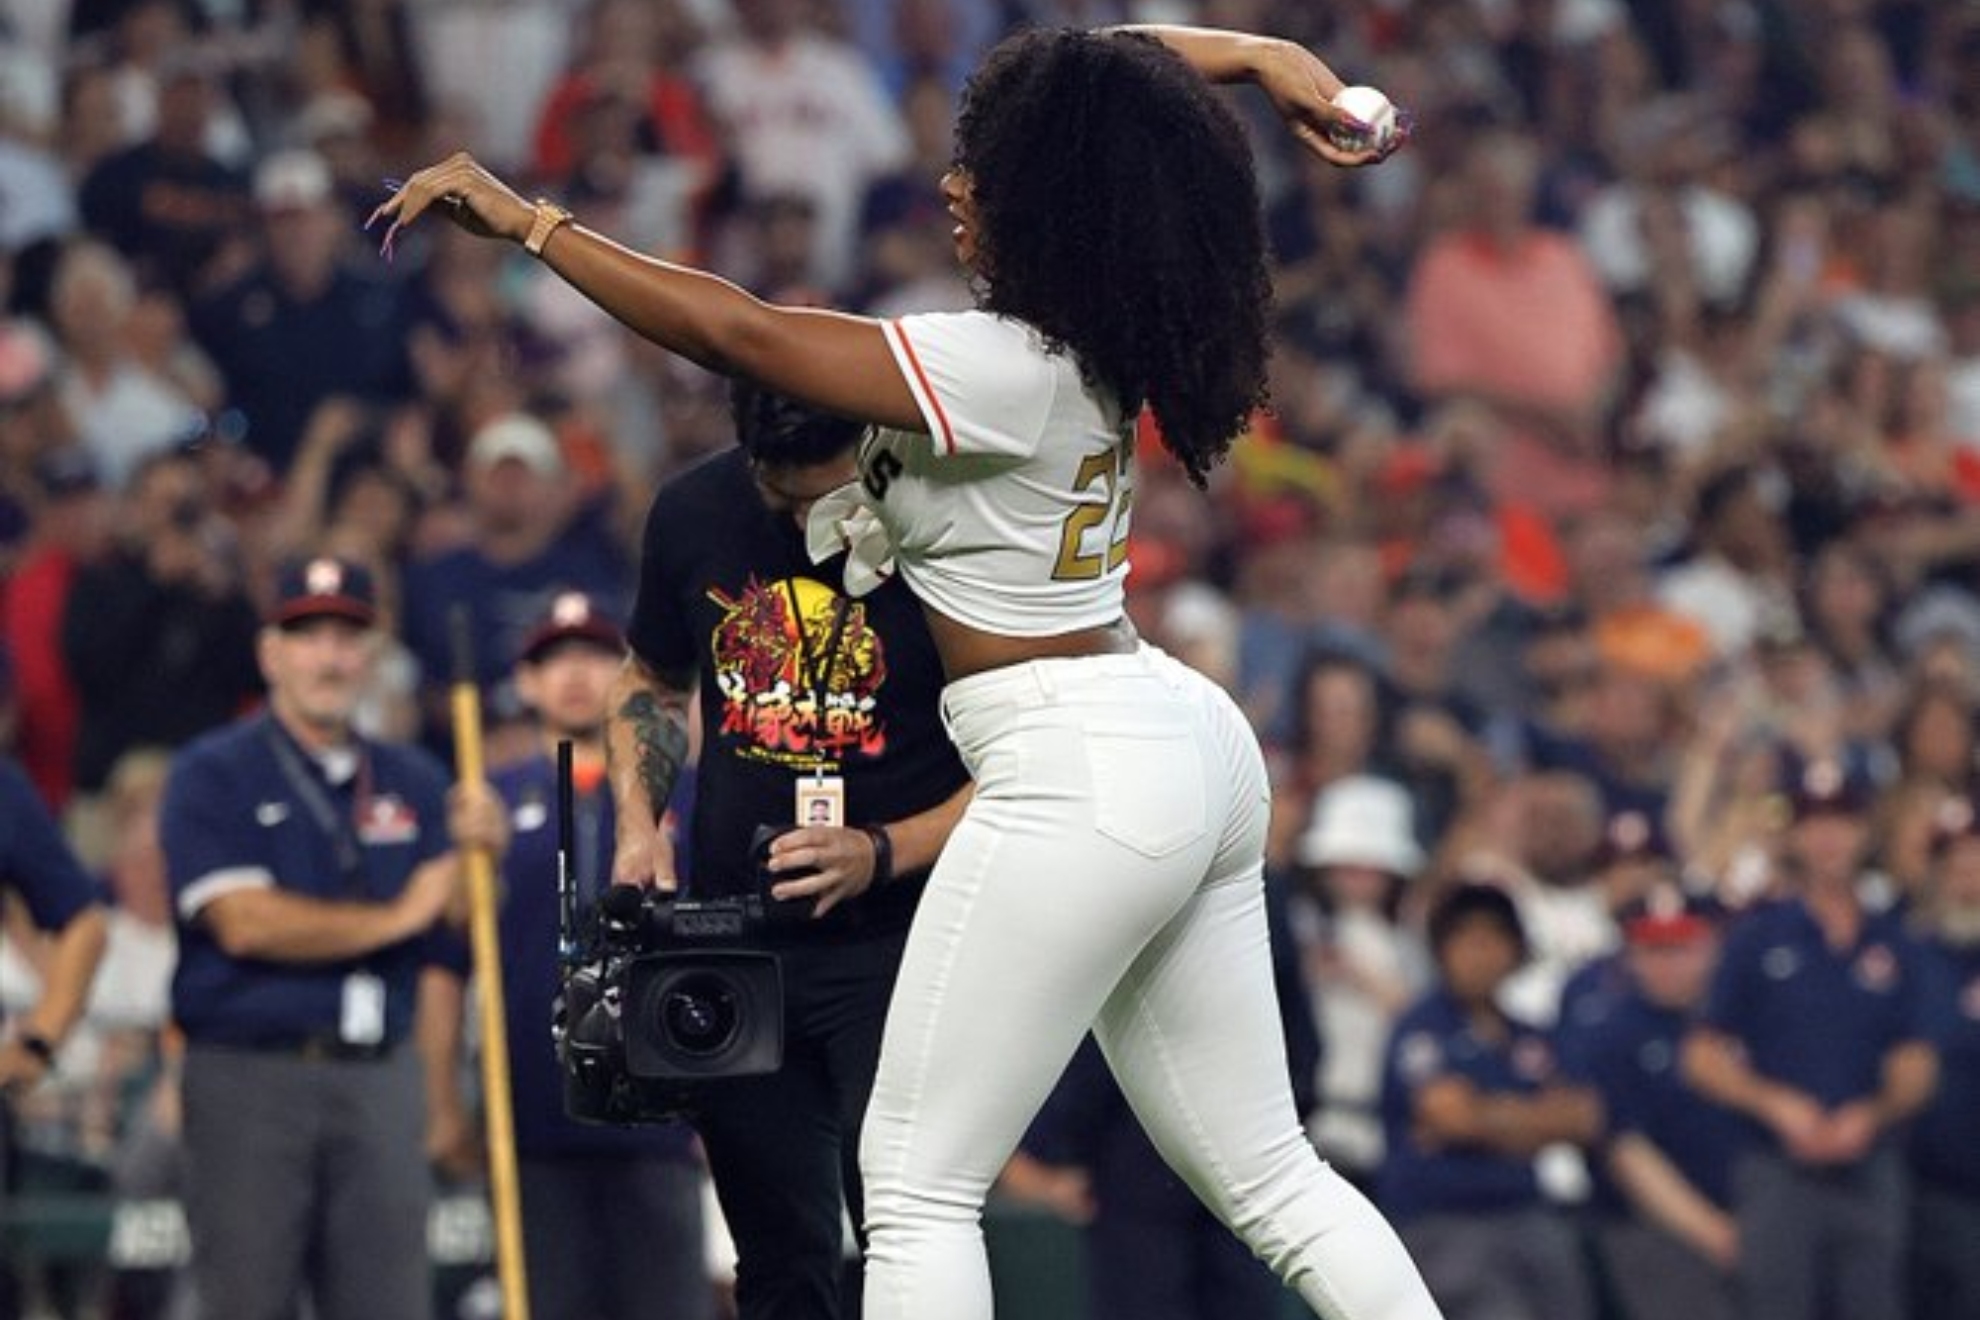 Megan Thee Stallion throws the first pitch at the Houston Astros opener